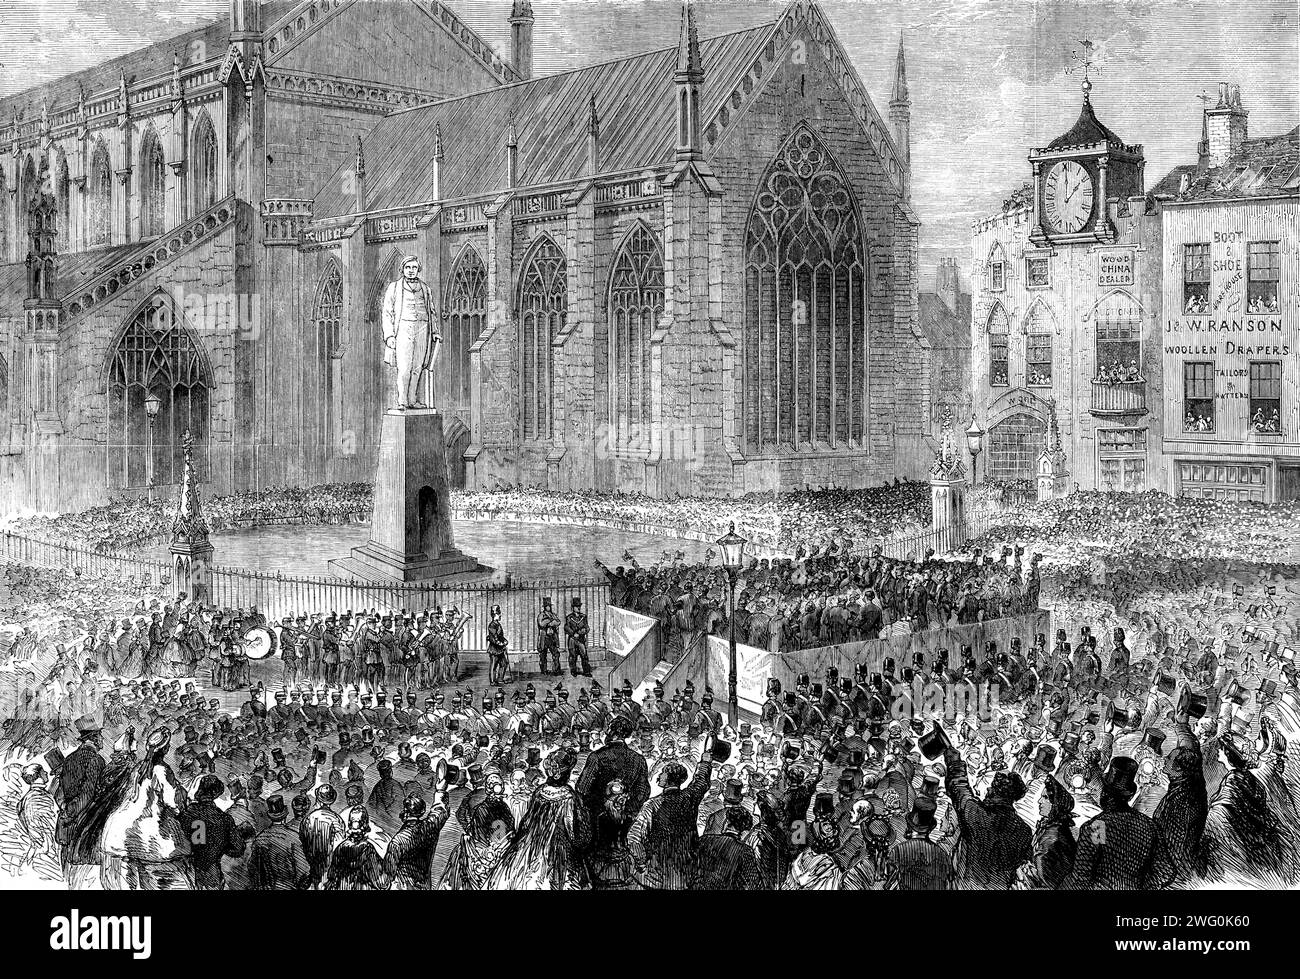 Inauguration of the memorial statue to Mr. Herbert Ingram, M.P., in the Market-Place, Boston, [in Lincolnshire], 1862. View of the '...ceremony of uncovering the Ingram Memorial Statue, from photographs by Mr. E. Hackford...The statue stands...within the shadow of the fine old church...Boston kept high holiday...most of the shops were closed, whilst the windows of the houses were thronged by eager spectators. The...committee and invited guests met the local authorities at the Assembly Rooms, and walked thence, in procession to the site of the statue. In the Marketplace had been erected a platf Stock Photo